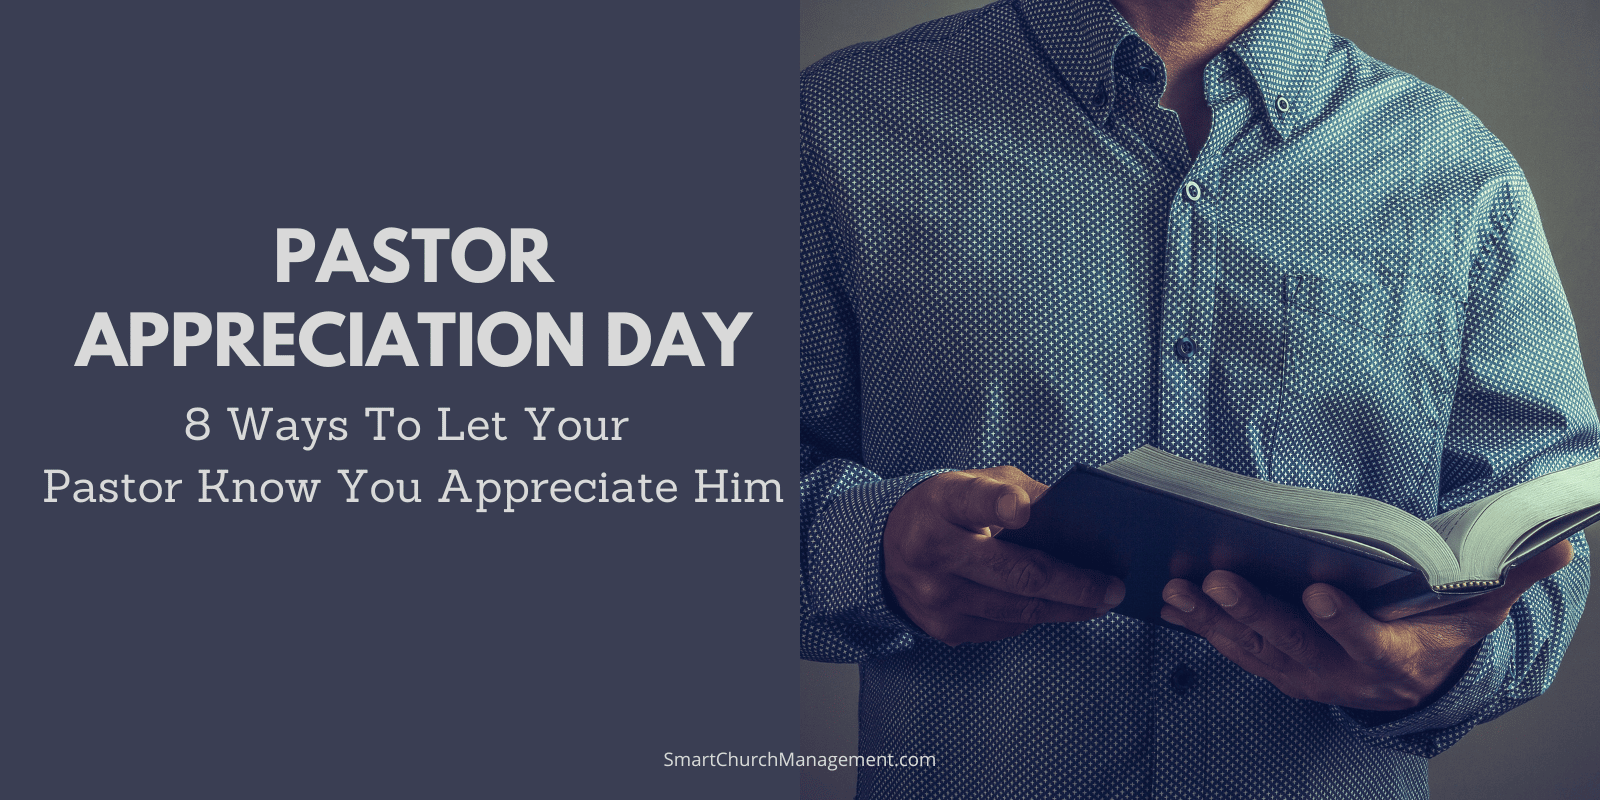 Pastor Appreciation Day  - Tips for showing appreciation to your pastor